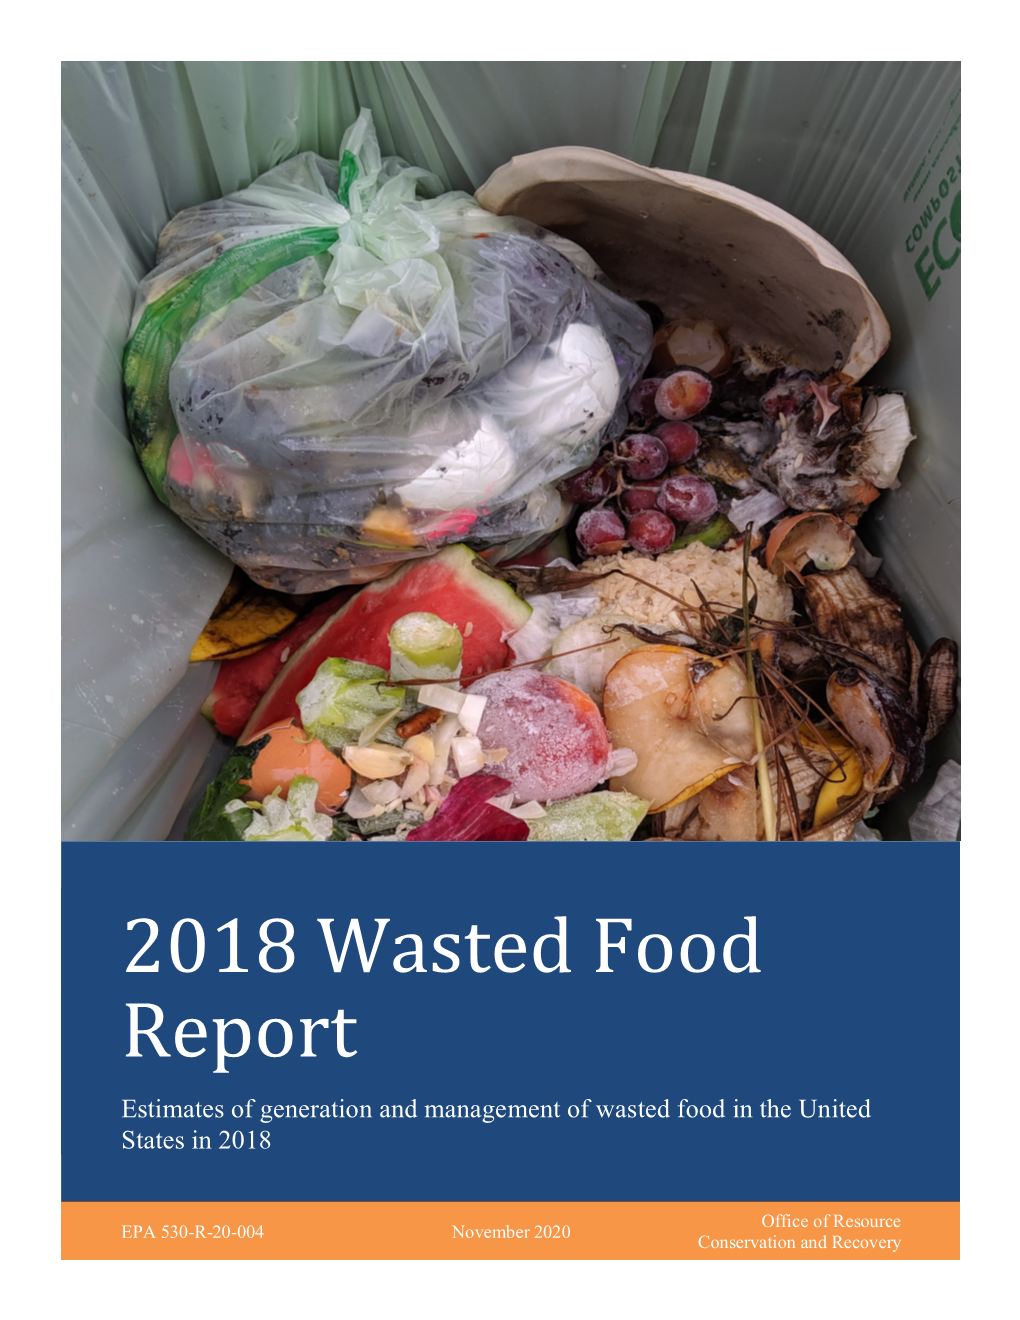 EPA 2018 Wasted Food Report